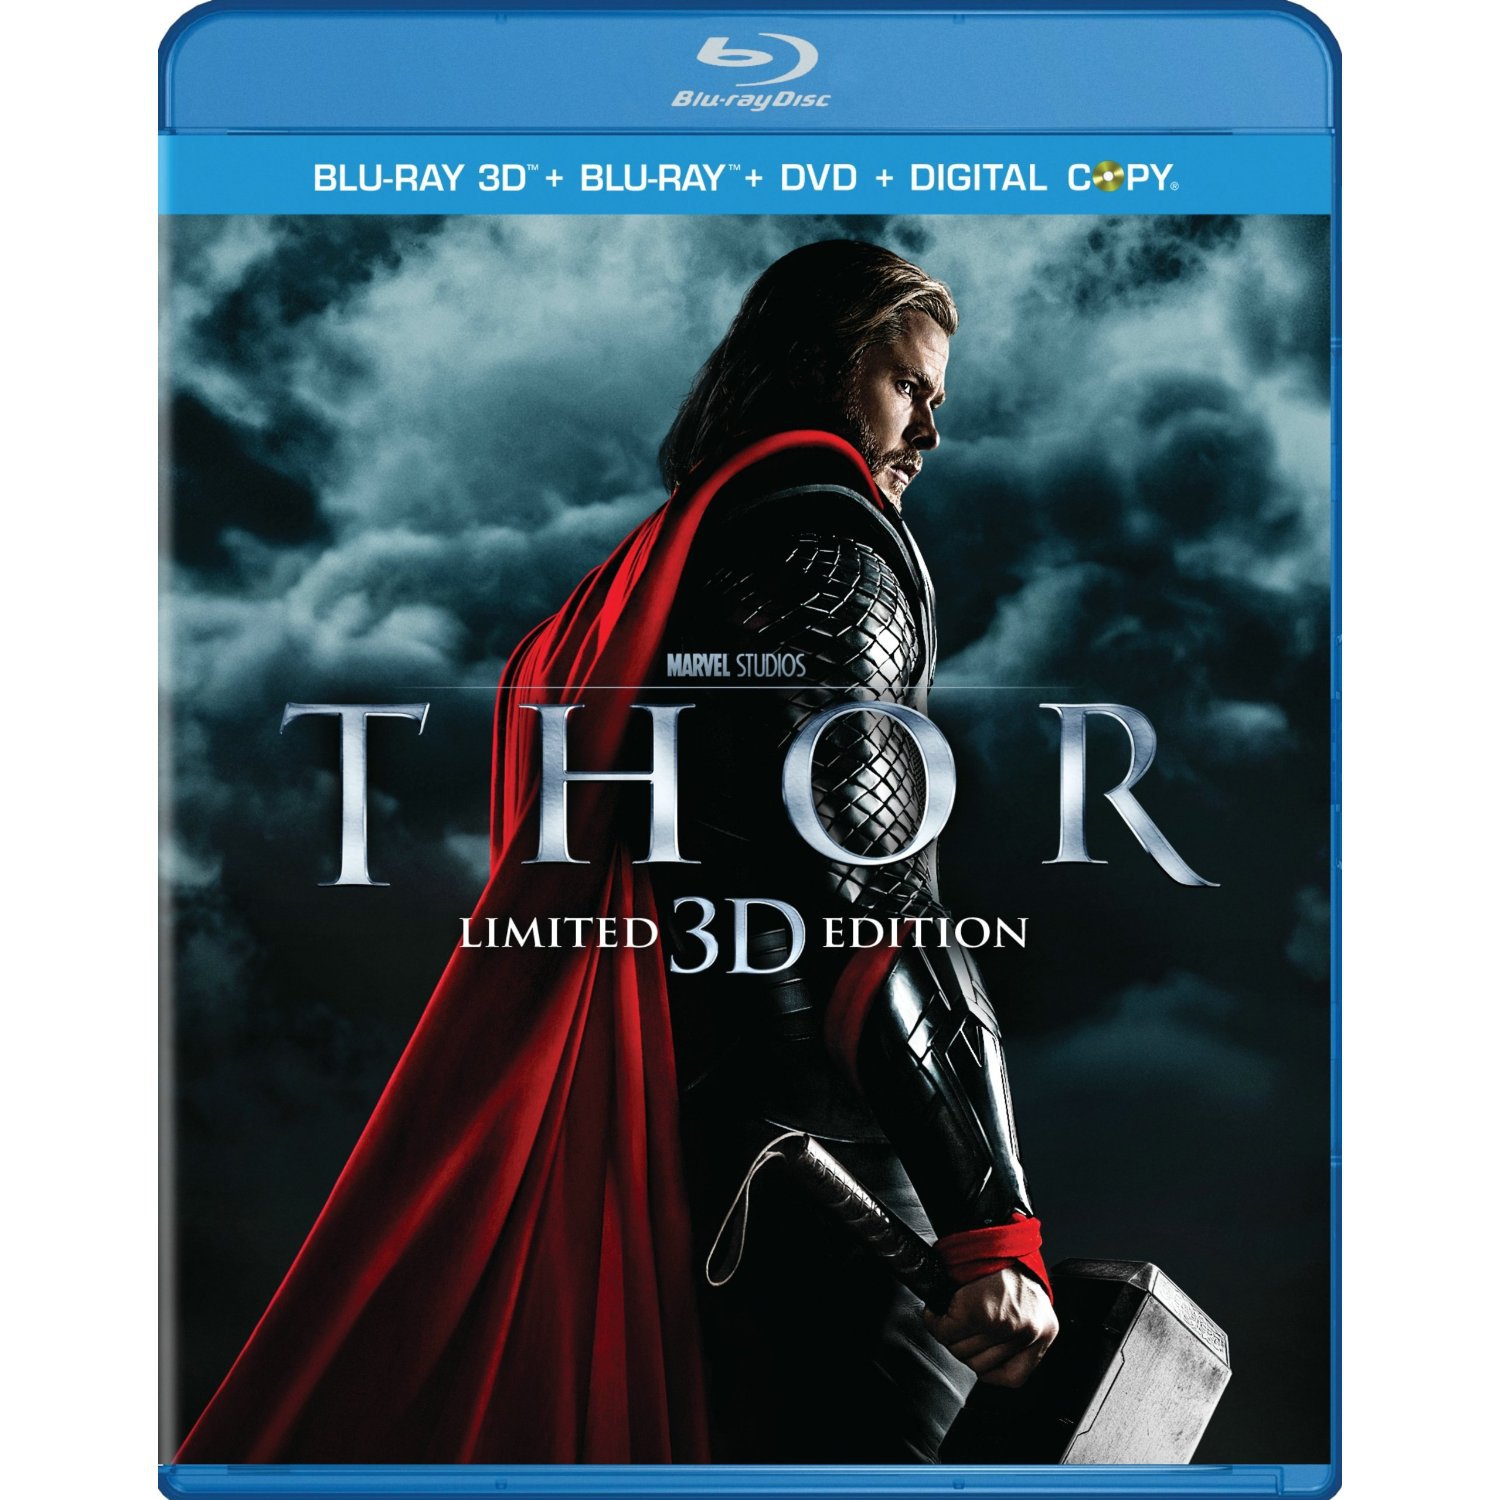 Thor: Limited 3D Edition